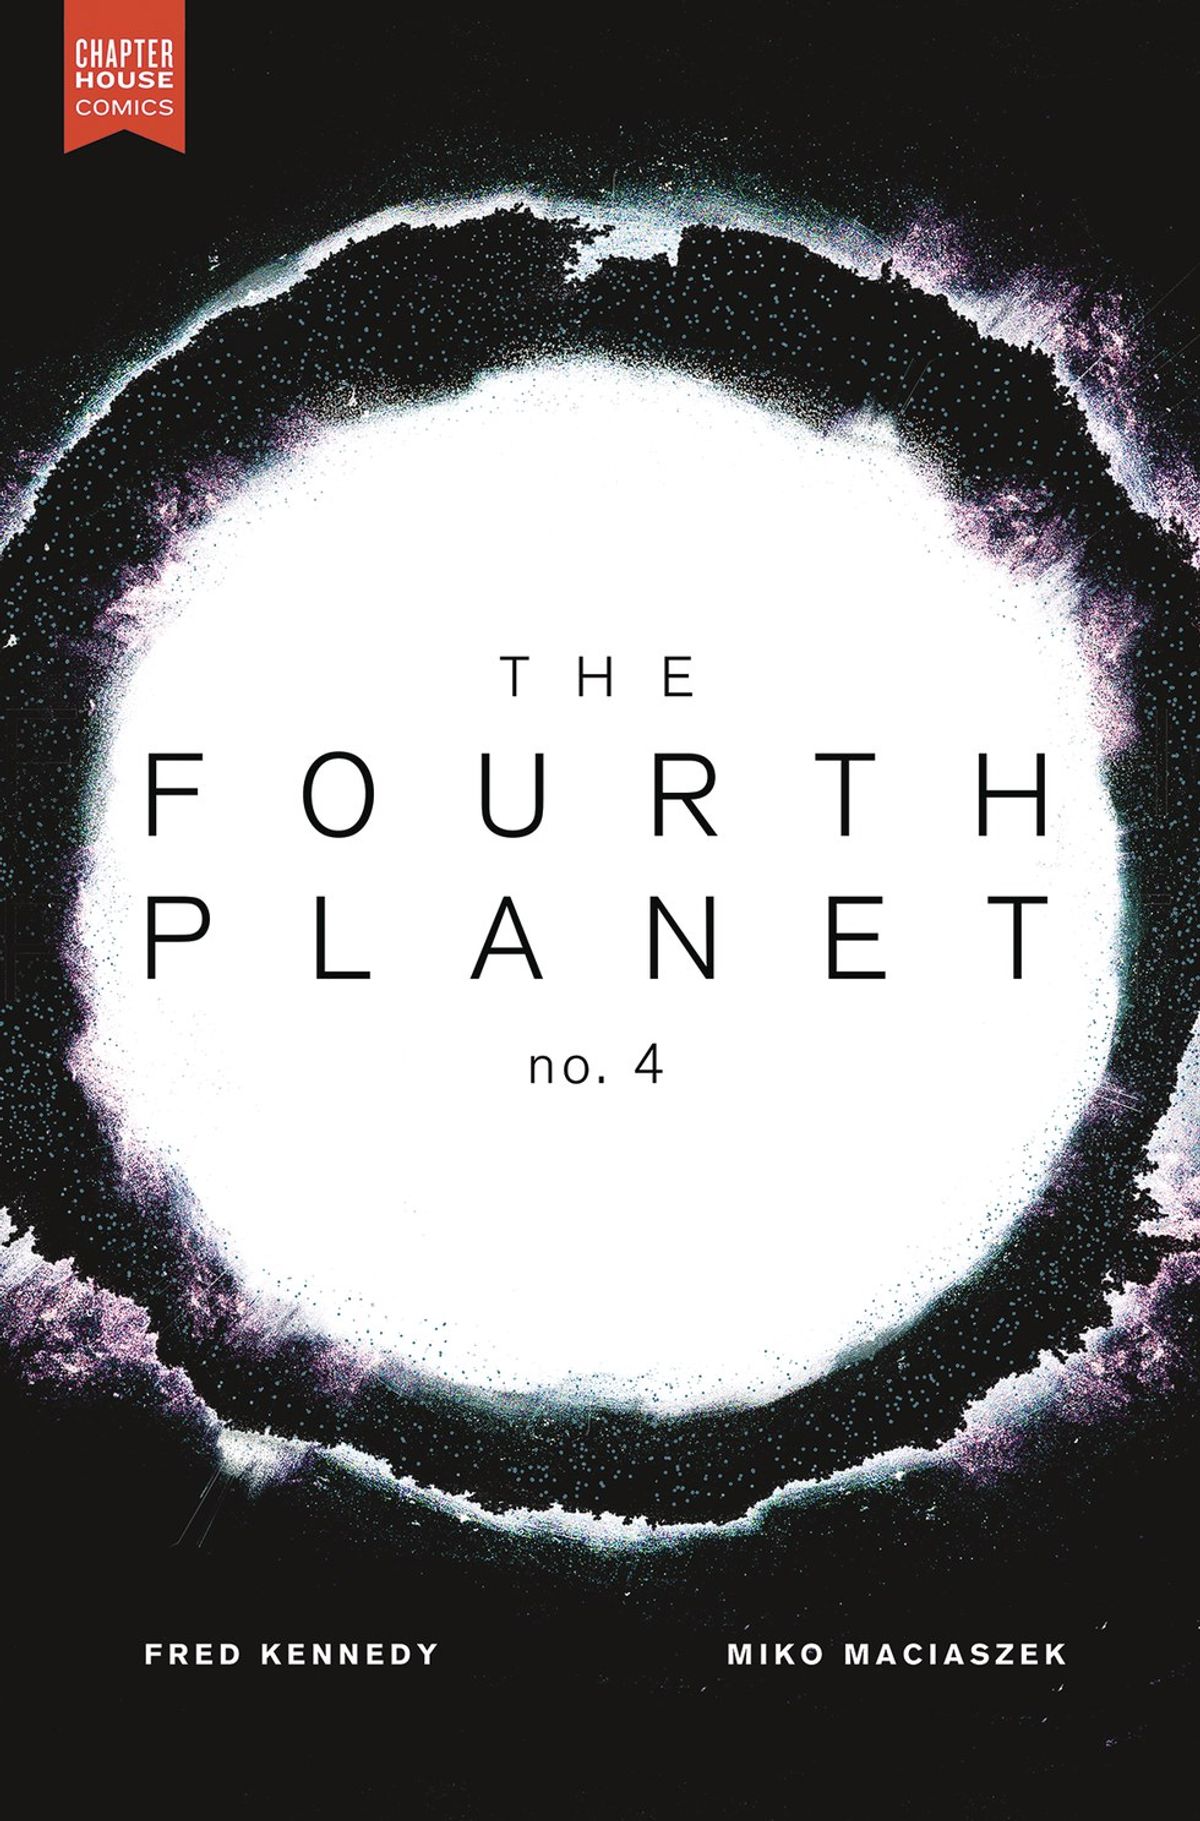 A Review Of The Comic 'The Fourth Planet #4'